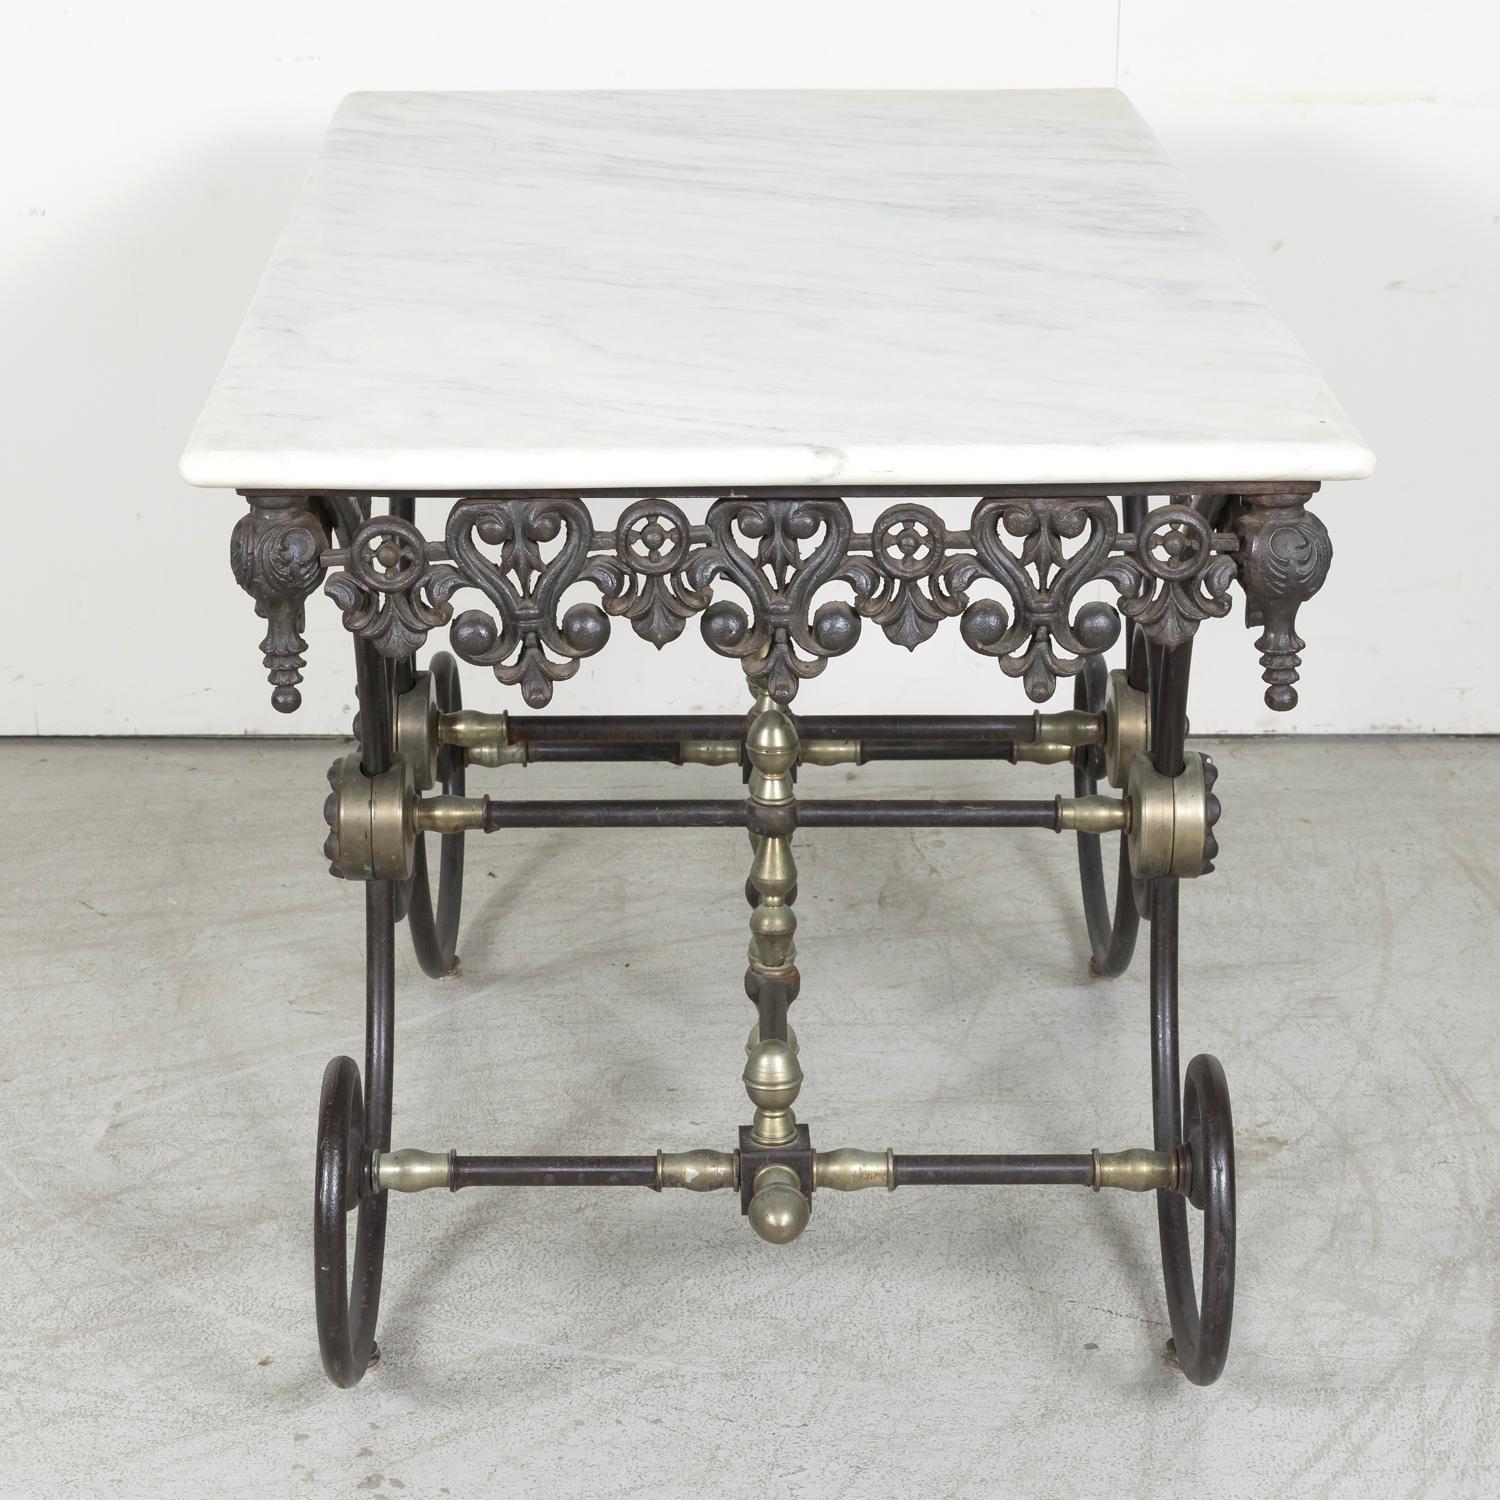 Vintage French Iron and Marble Patisserie or Pastry Table 10